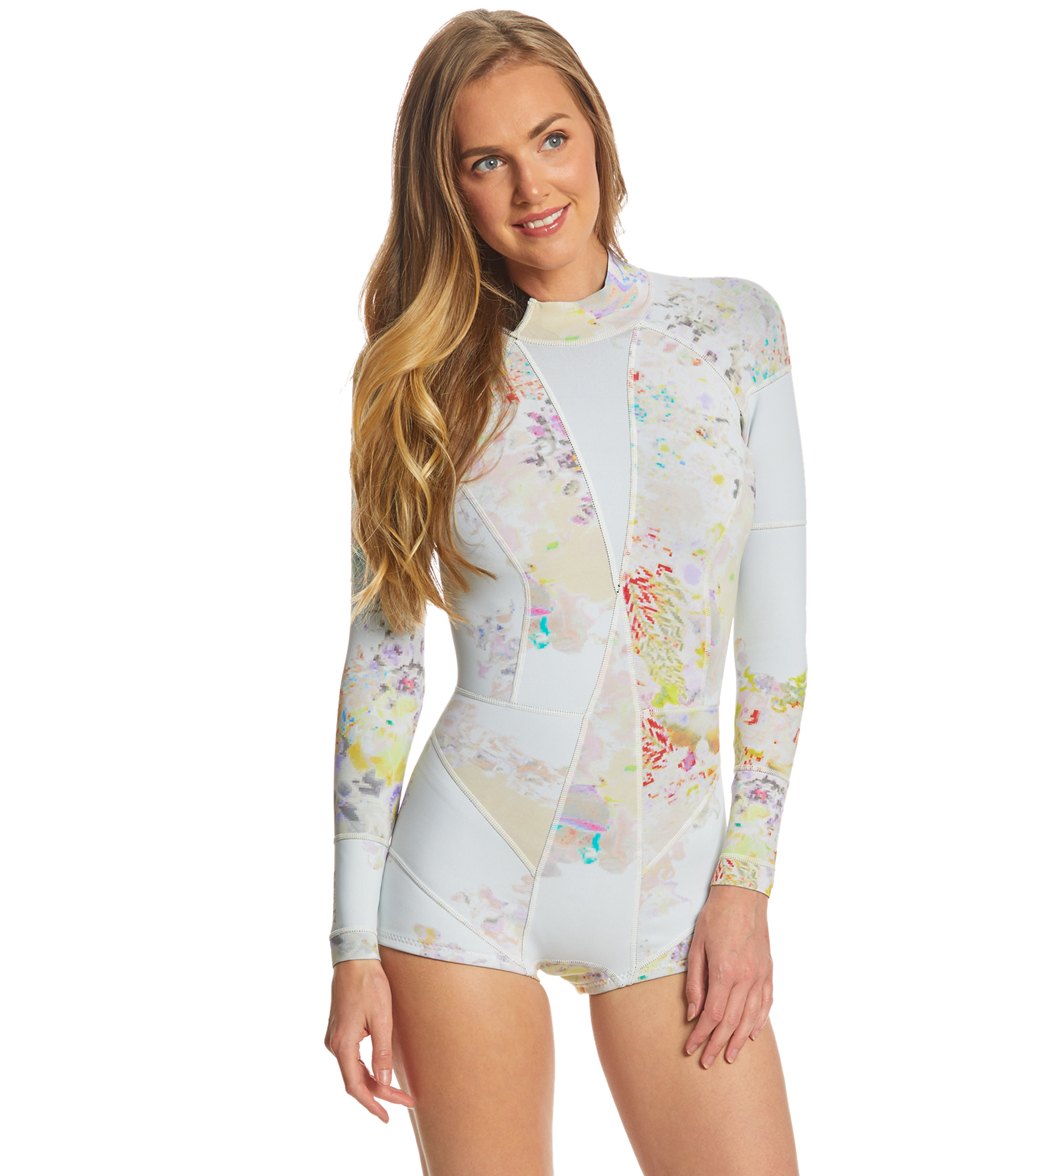 Cynthia Rowley 0.5mm Neoprene Hightide Wetsuit at SwimOutlet.com - Free ...